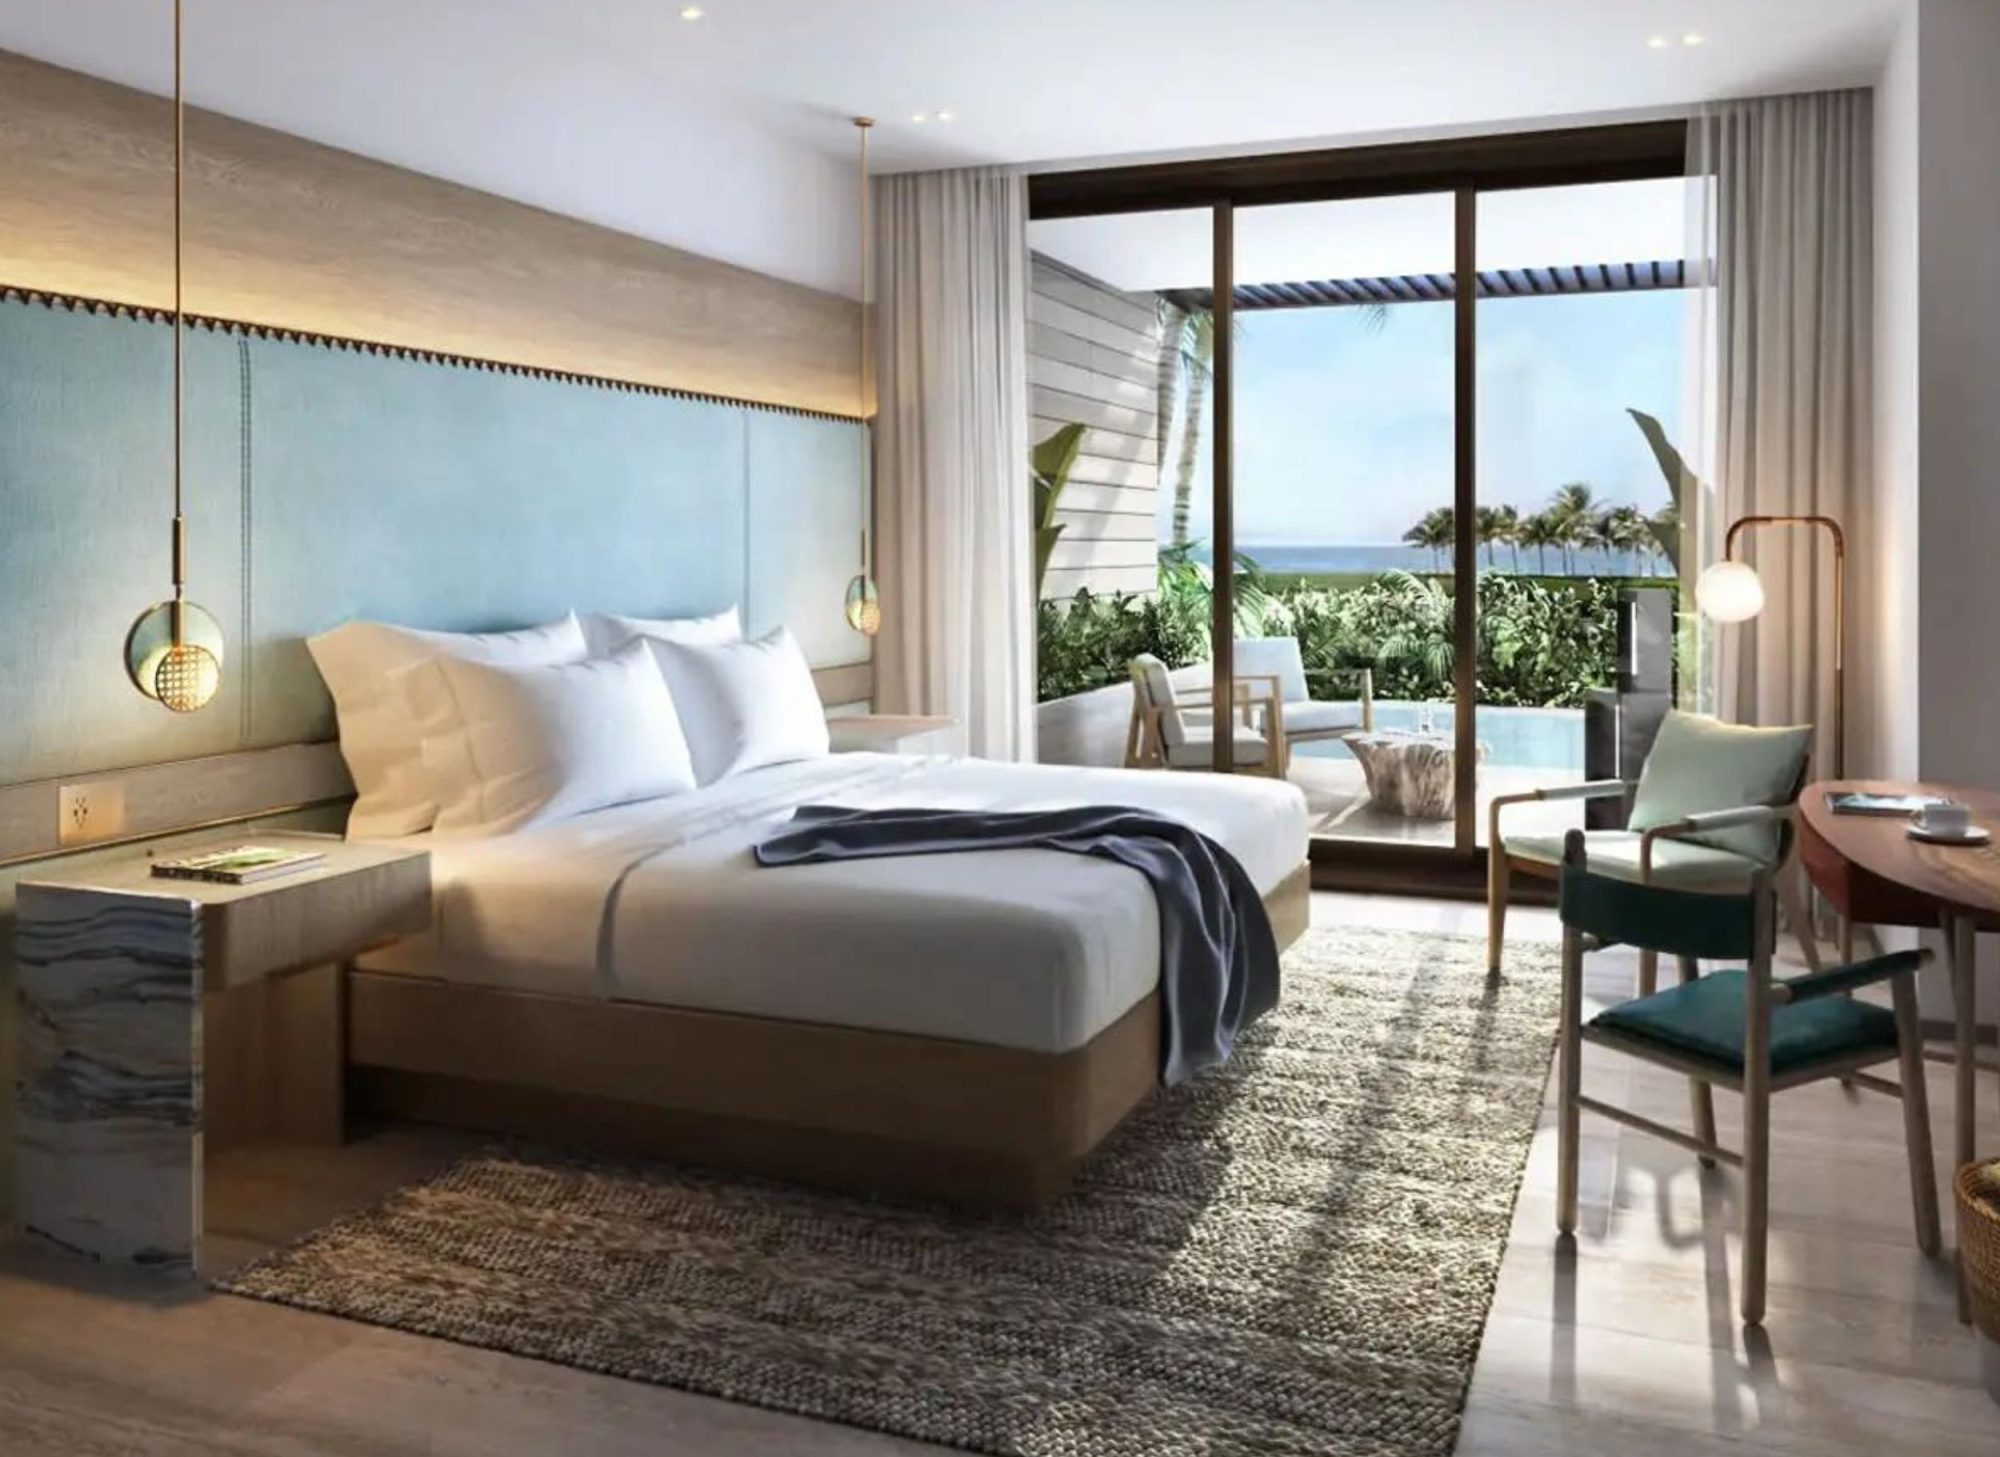 The Residences at St. Regis Cap Cana is a haven of luxury in the Dominican Republic